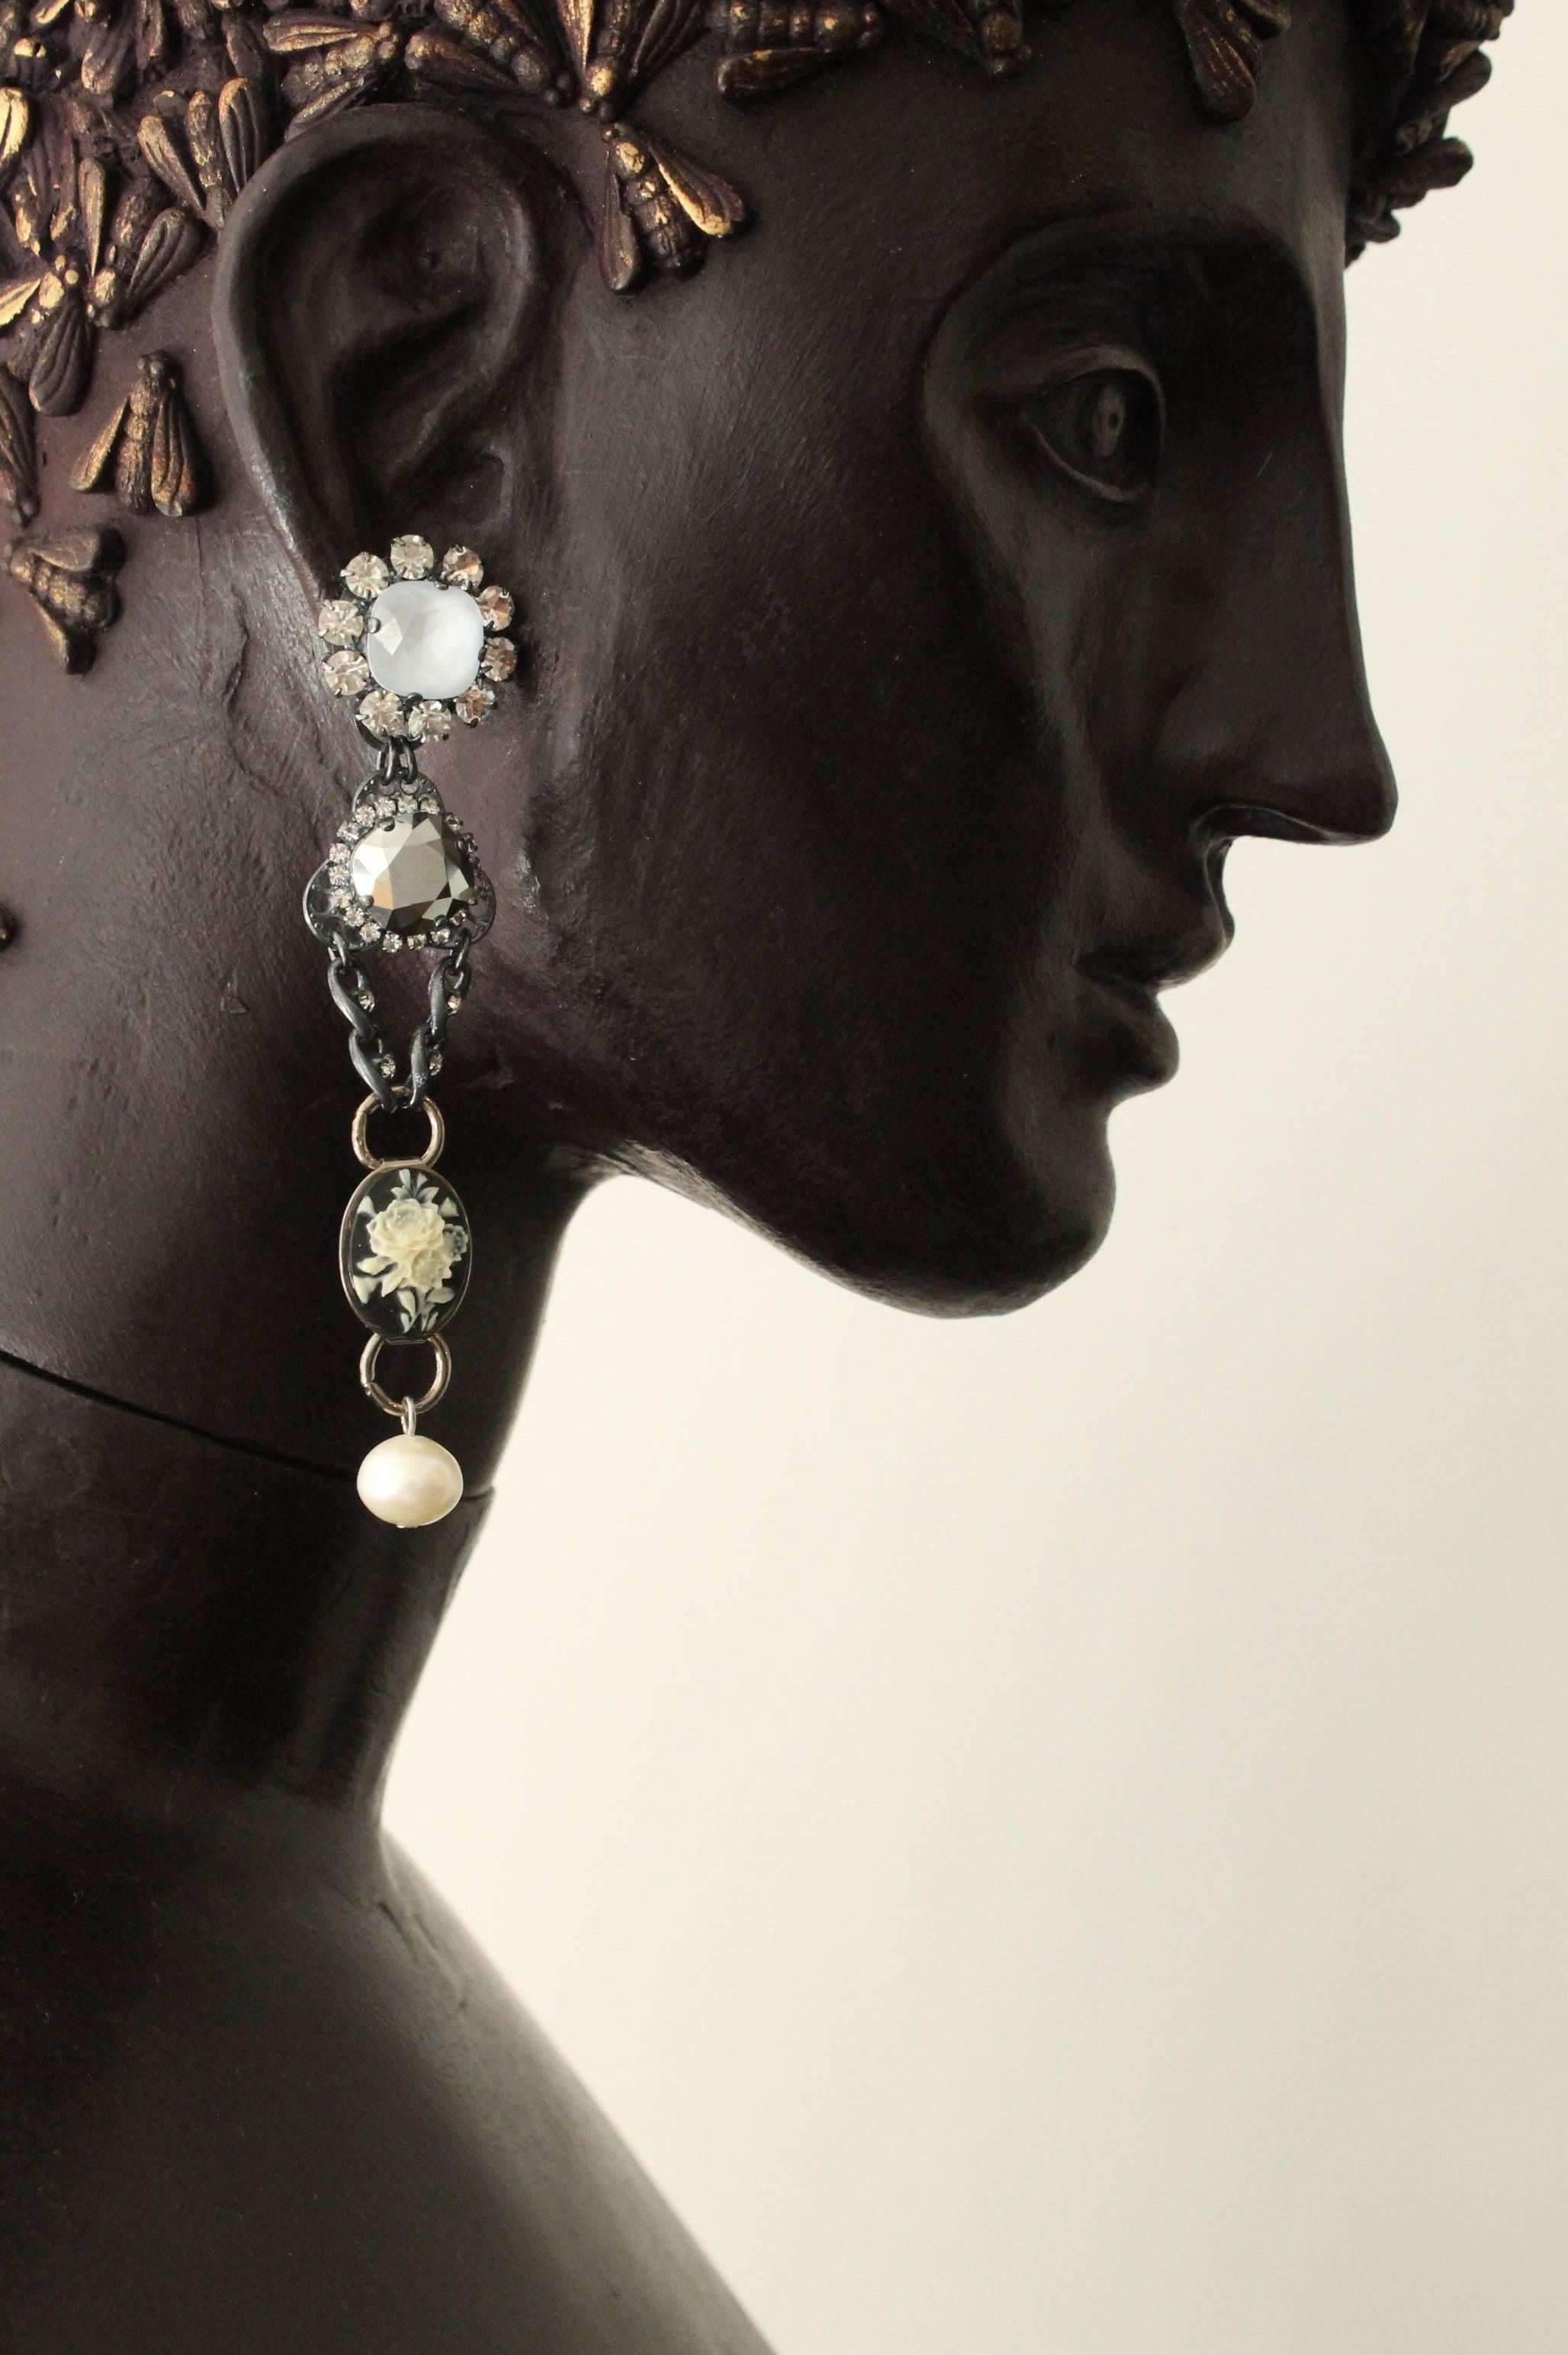 Stunning antique silver-plated earrings featuring silver mirror and white hand enamelled Swarovski crystals, asymmetric cameo cabuchons and Swarovski pearls

Handmade for the past 25 years by Vicki’s small team of artisans, in the brand’s Belgravia